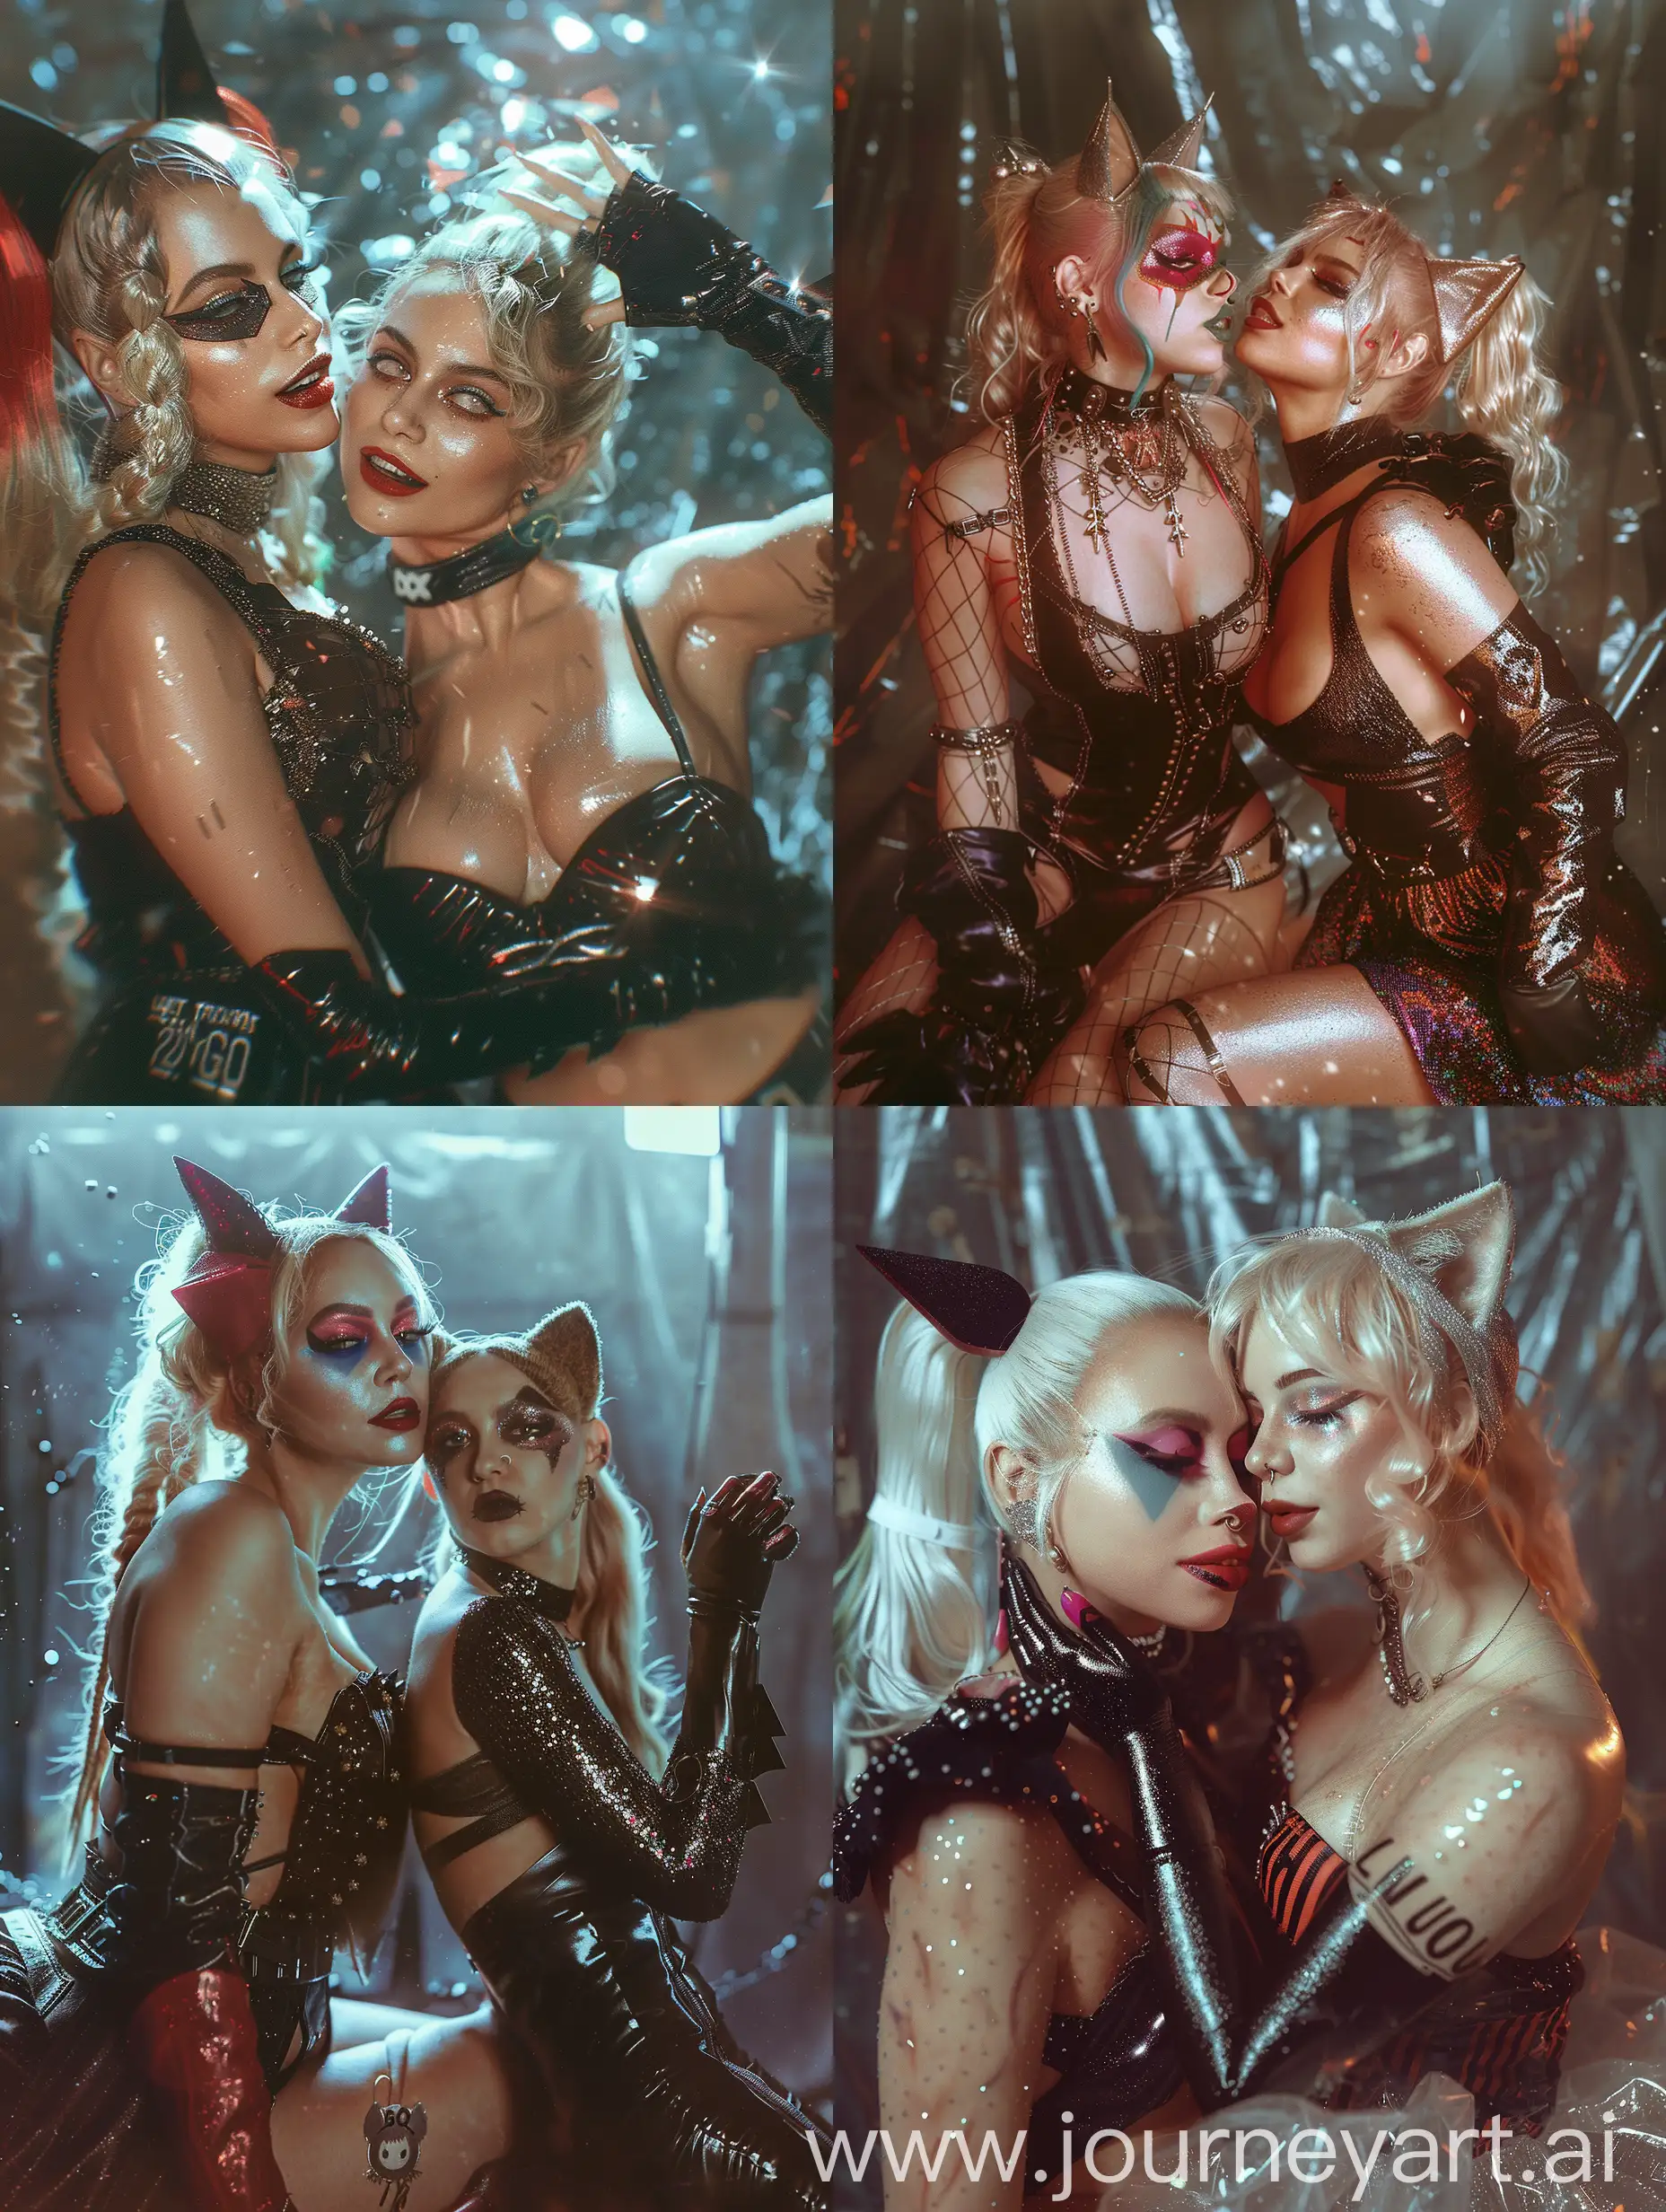 Lady-Gaga-as-Harley-Quinn-and-Ariana-Grande-as-Cat-Woman-Cinematic-Photoshoot-with-Dramatic-Lighting